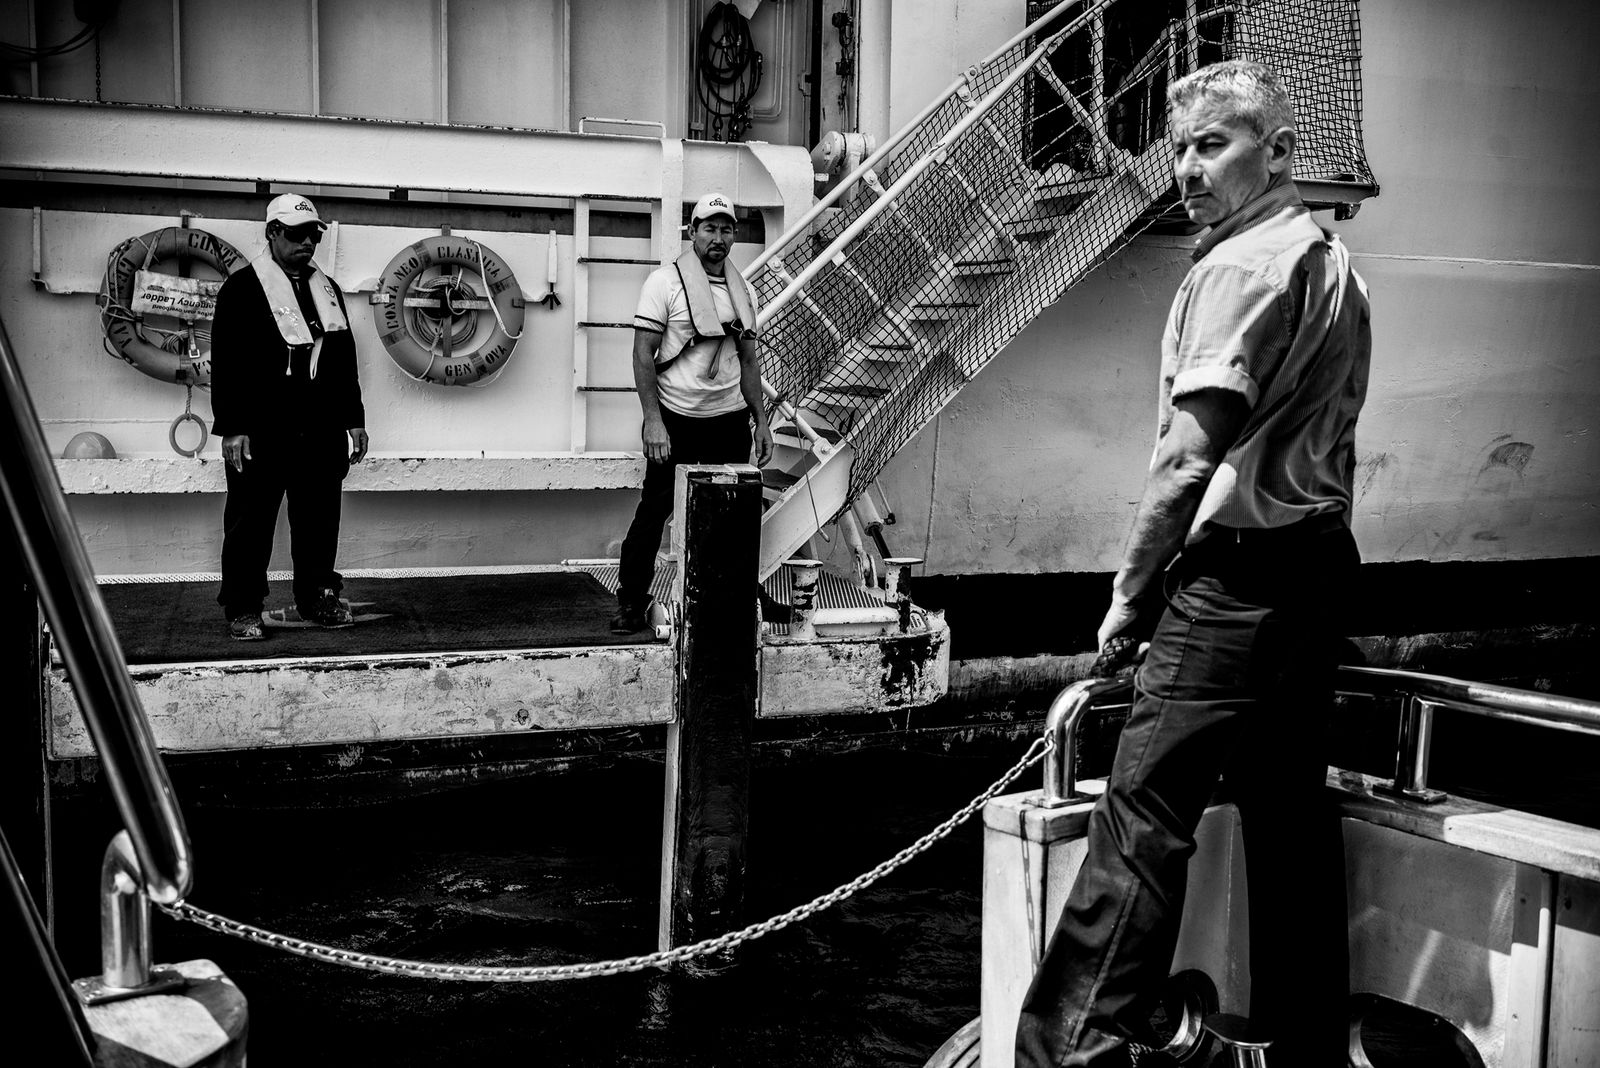 © Simona Bonanno - Sailors during the docking operations between the tender and the cruise ship. Mykonos, Greece 2017